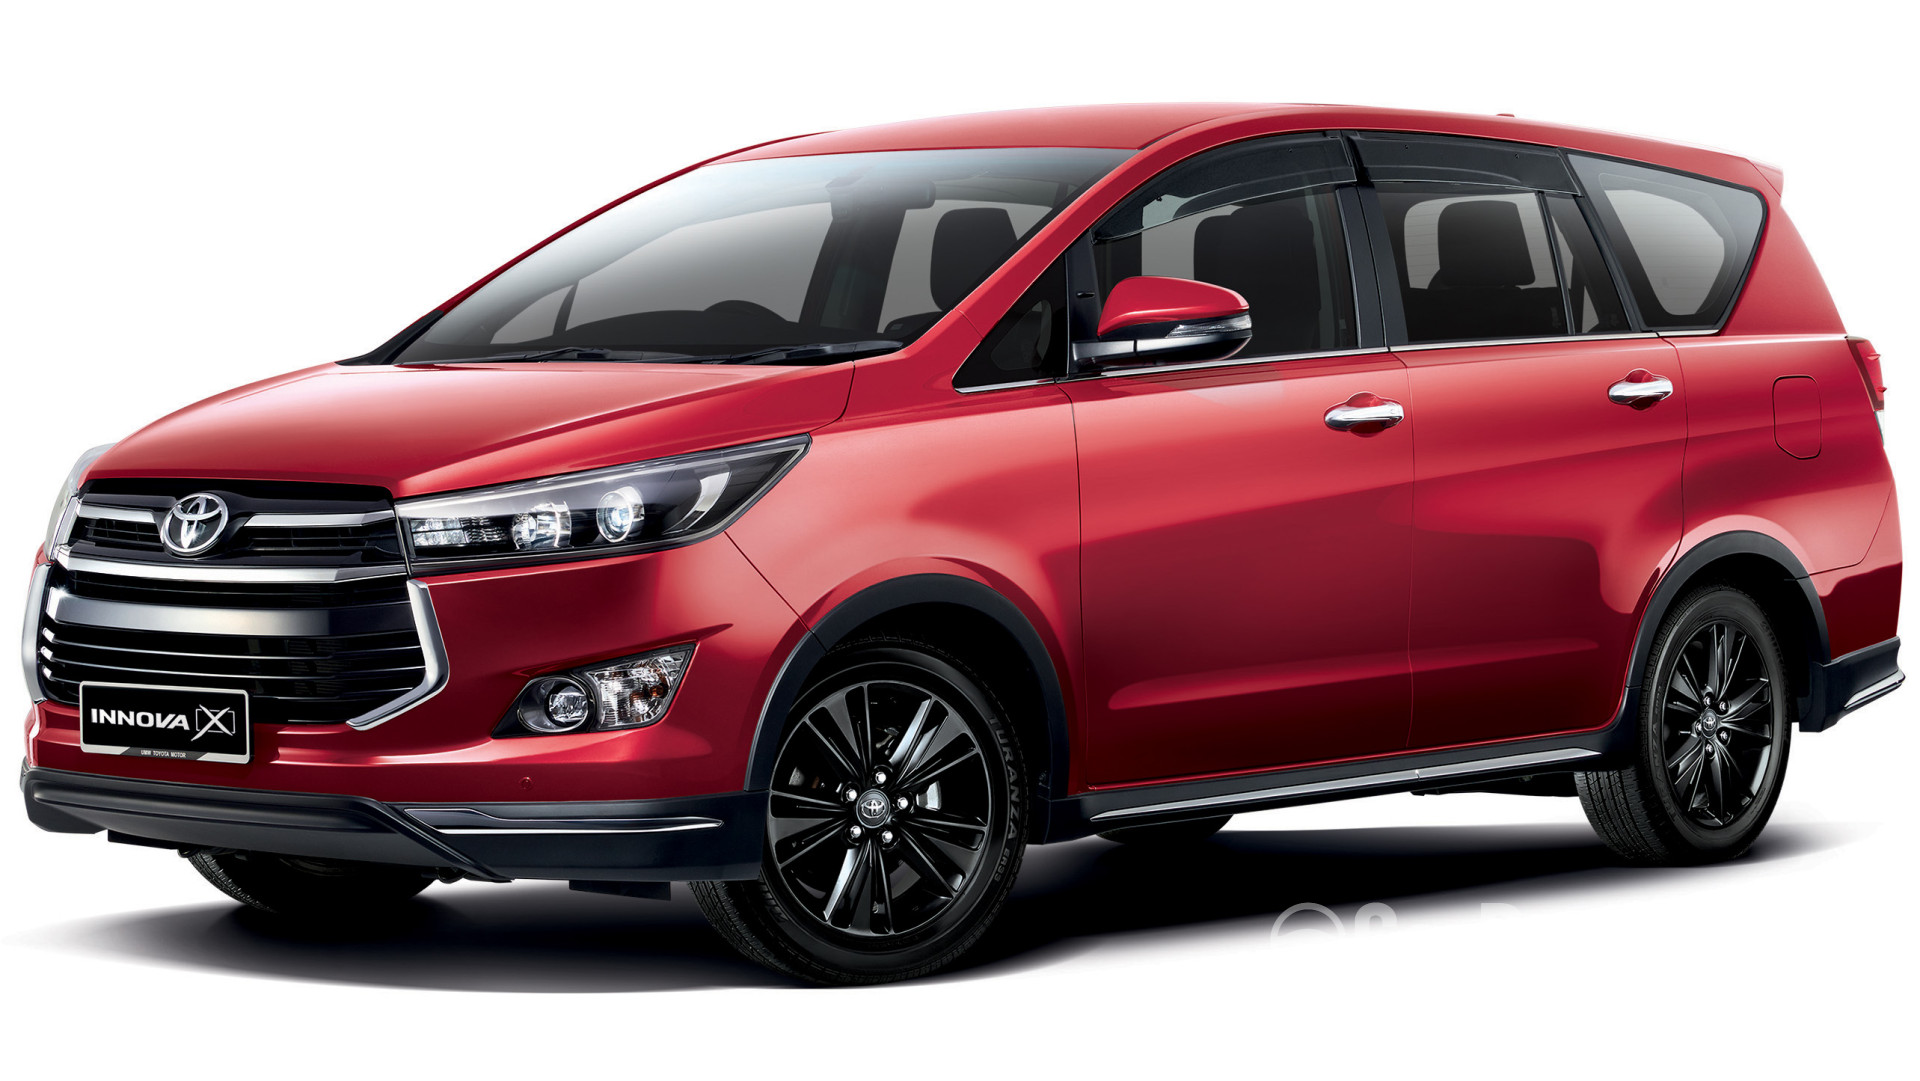 Toyota Innova AN140 (2016) Exterior Image #41728 in Malaysia - Reviews ...